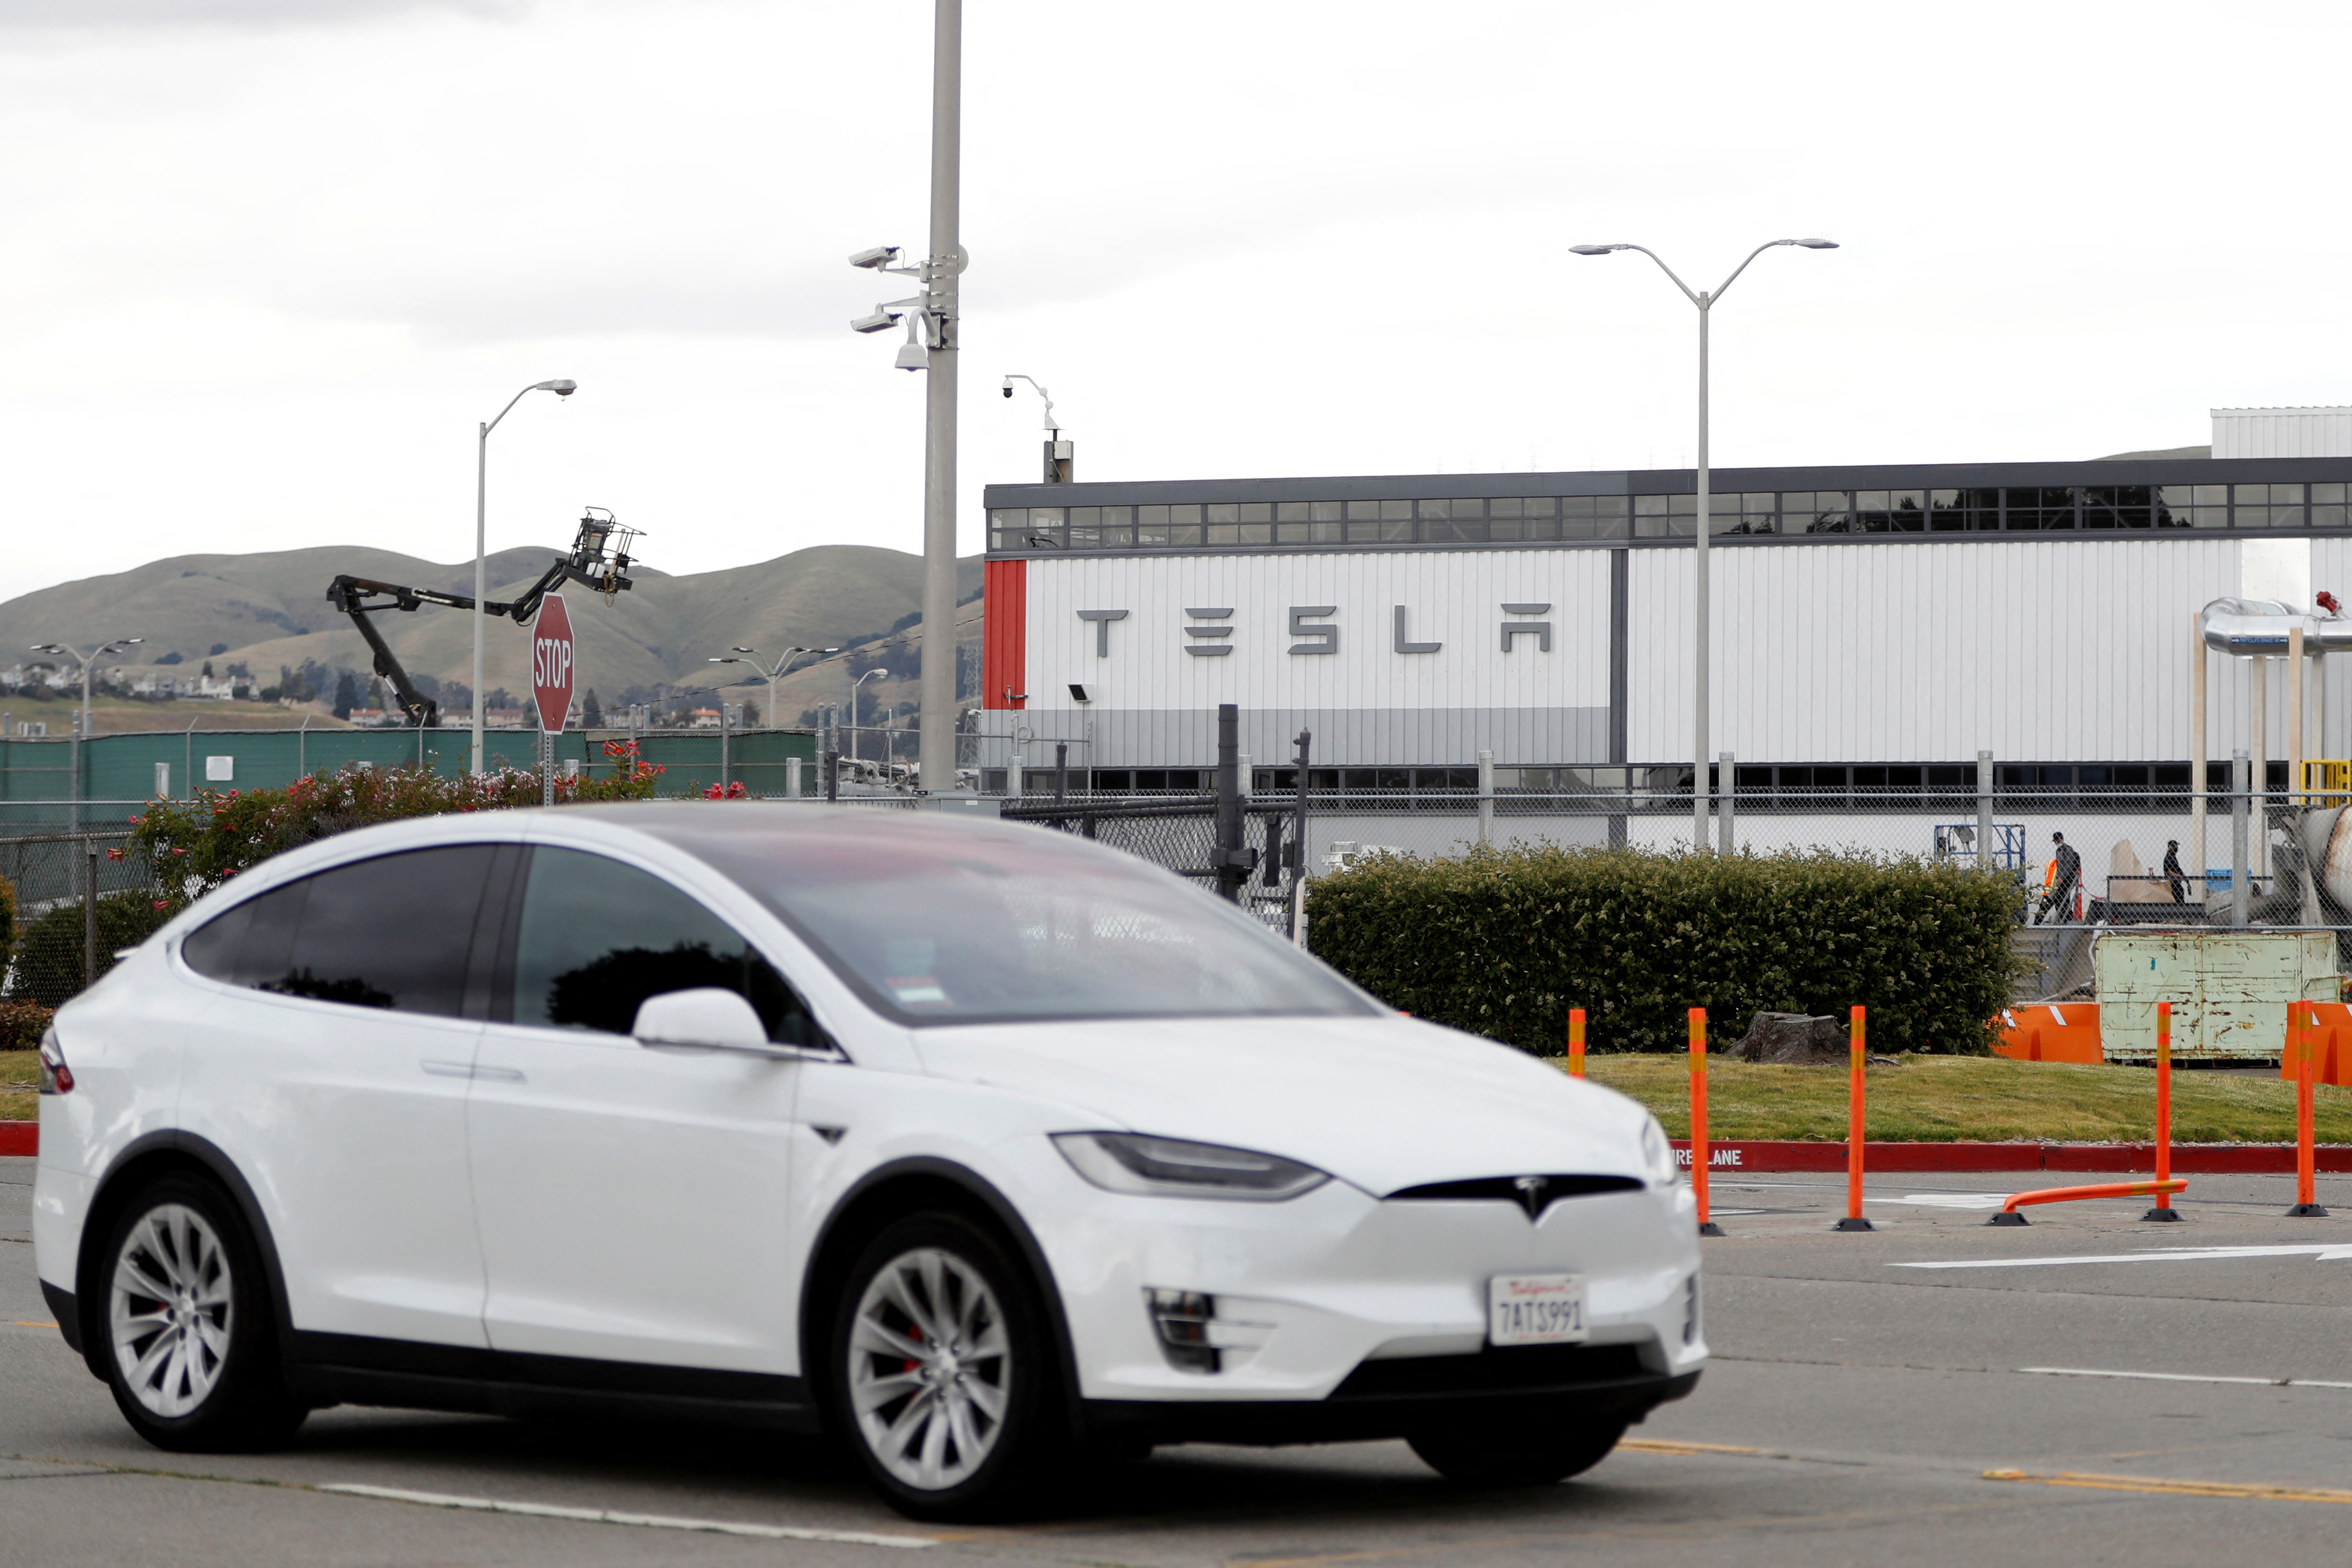 A Tesla vehicle drives past Tesla's primary vehicle factory after CEO Elon Musk announced he was defying local officials' coronavirus disease (COVID-19) restrictions by reopening the plant in Fremont, California, U.S. May 11, 2020. REUTERS/Stephen Lam